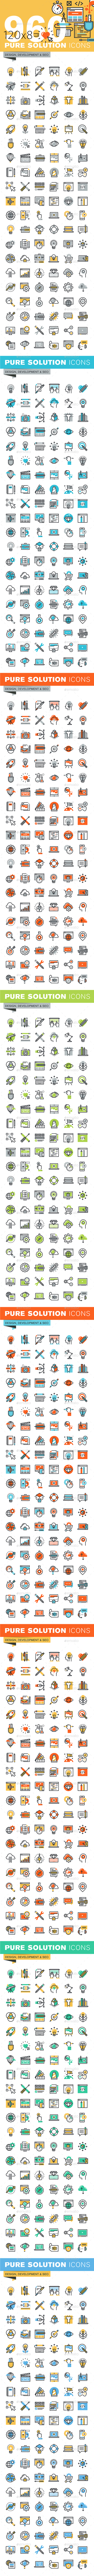 Set of Thin Line Flat Design Icons of Design, Development and SEO